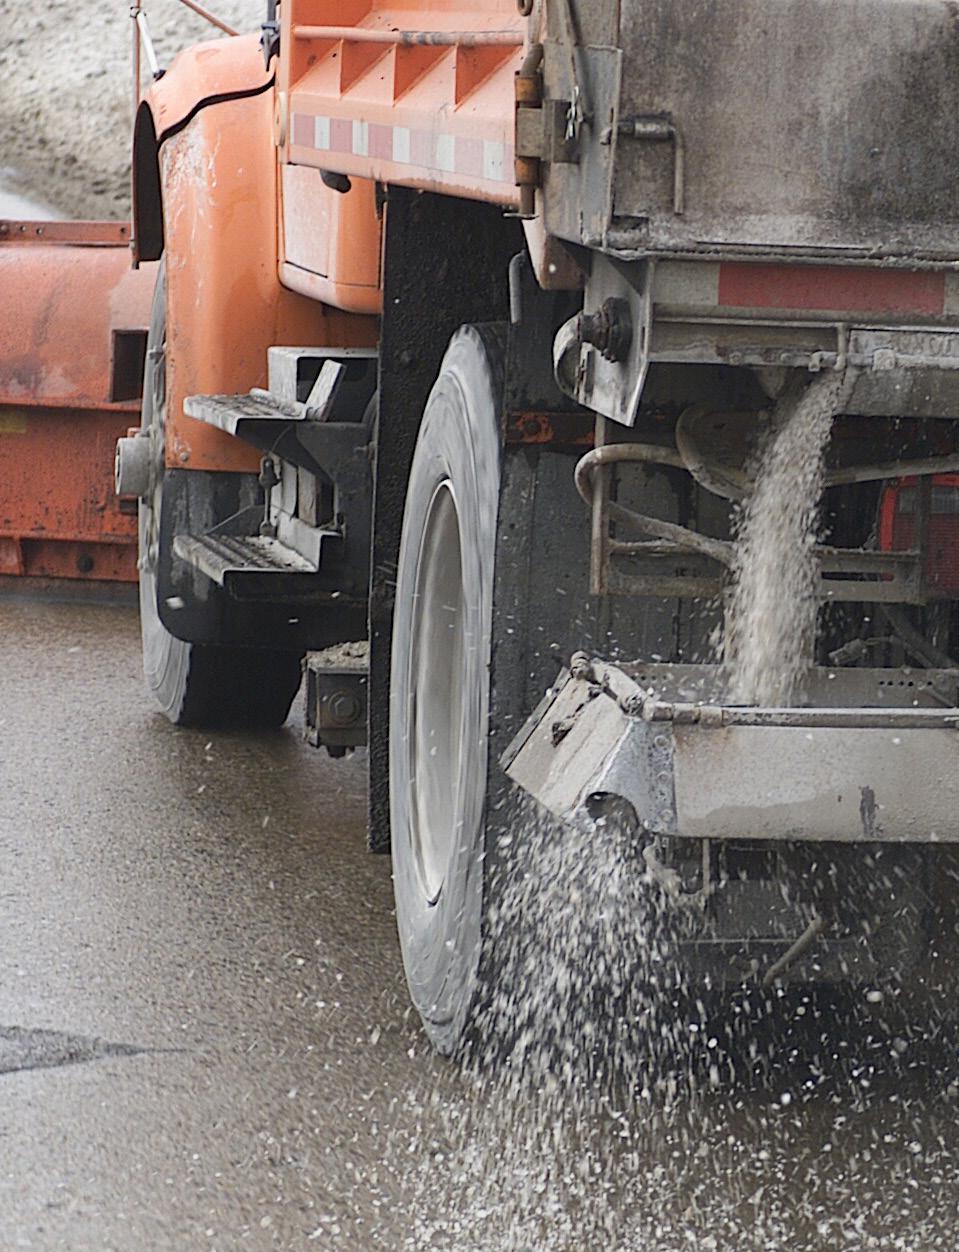 Salt Sustainability Plan In early 2018, MnDOT took the next steps in the responsible use of chlorides for winter maintenance.